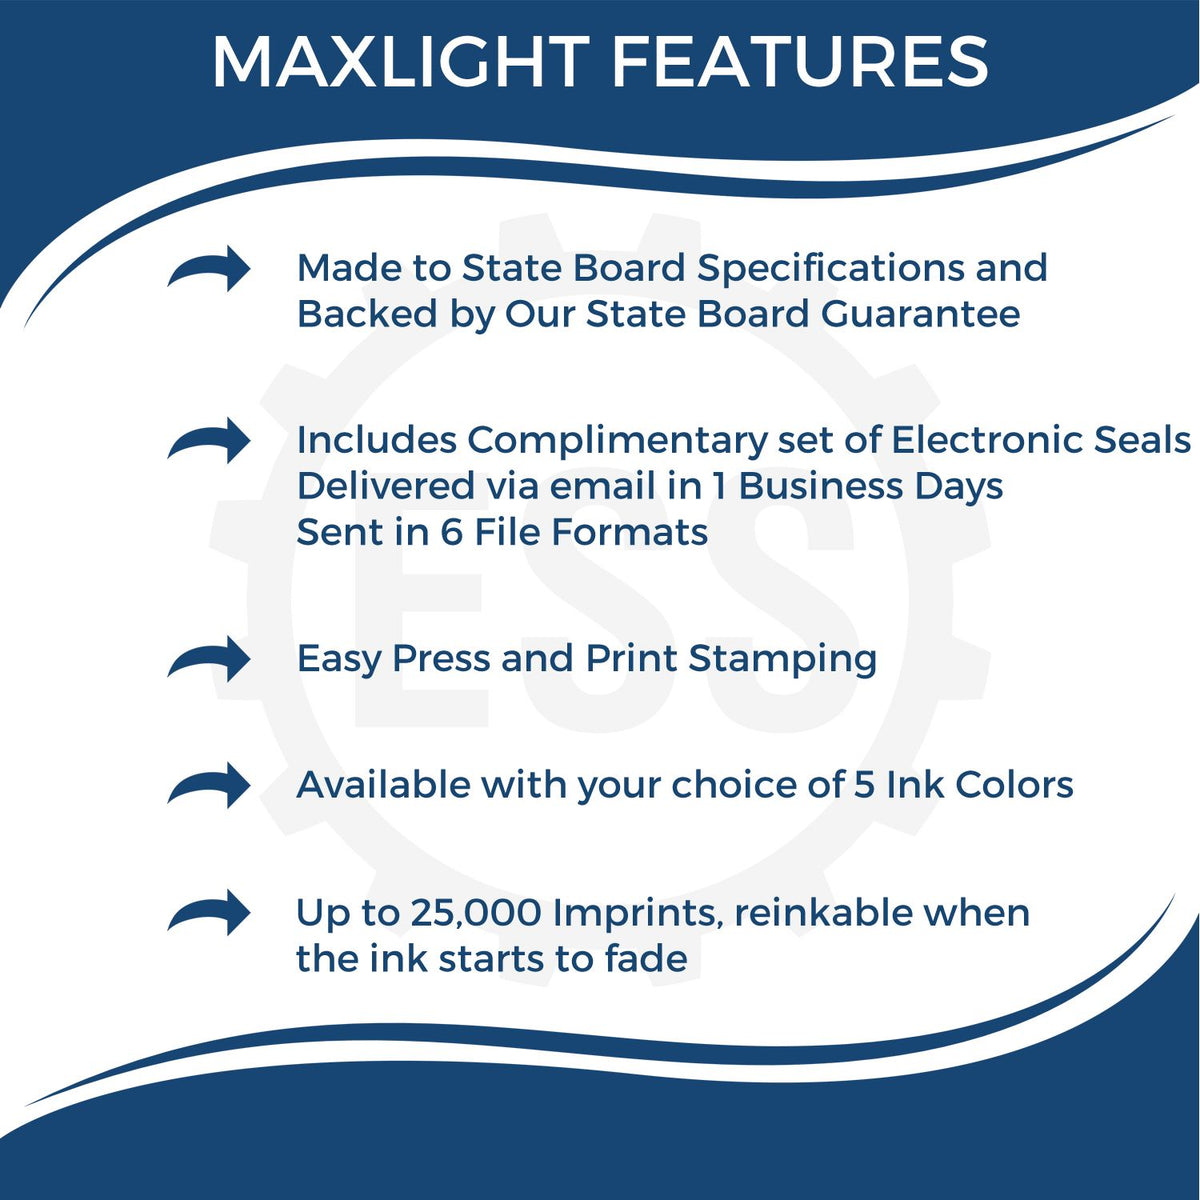 A picture of an infographic highlighting the selling points for the Premium MaxLight Pre-Inked Texas Landscape Architectural Stamp